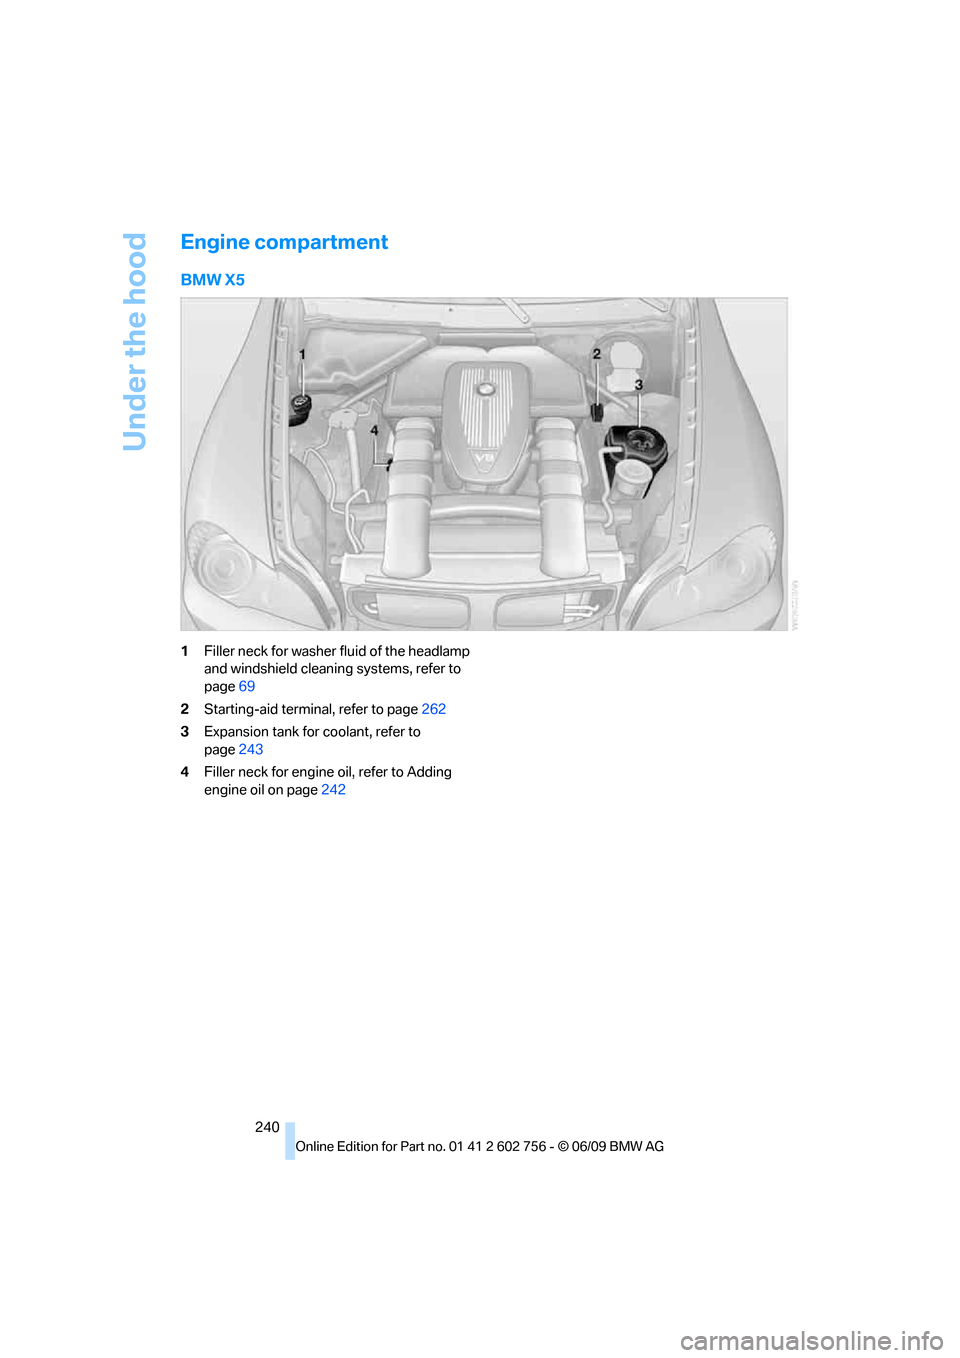 BMW X5 2010 E70 Owners Manual Under the hood
240
Engine compartment
BMW X5
1Filler neck for washer fluid of the headlamp 
and windshield cleaning systems, refer to 
page69
2Starting-aid terminal, refer to page262
3Expansion tank f